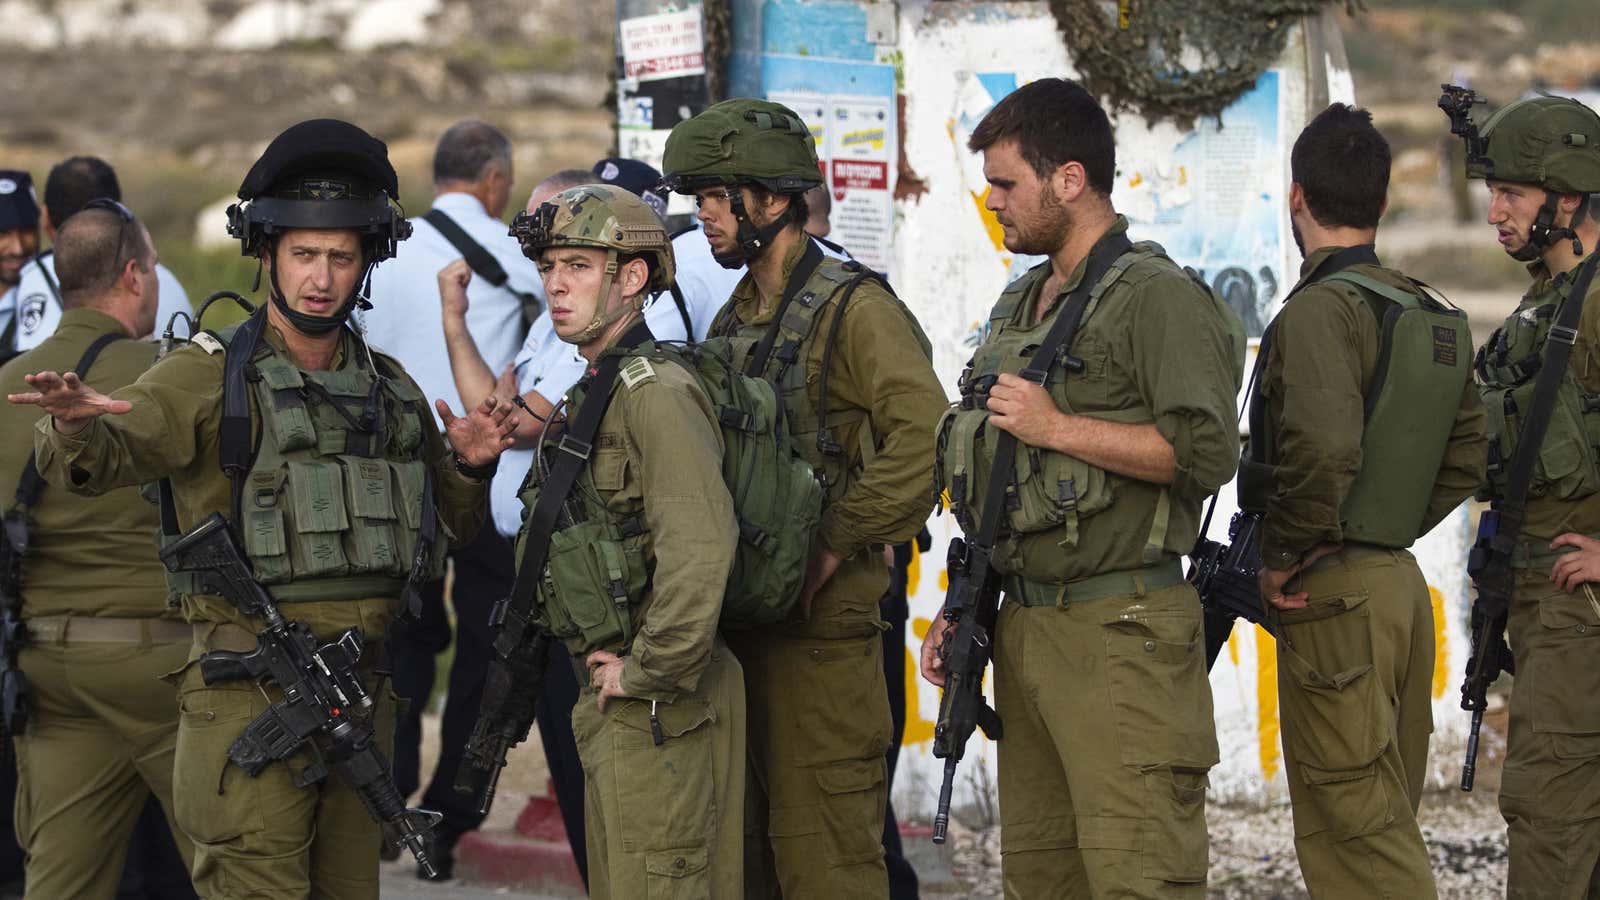 Israeli soldiers at the scene where a Palestinian man allegedly carried out an attack near the West Bank Jewish settlement of Efrat.